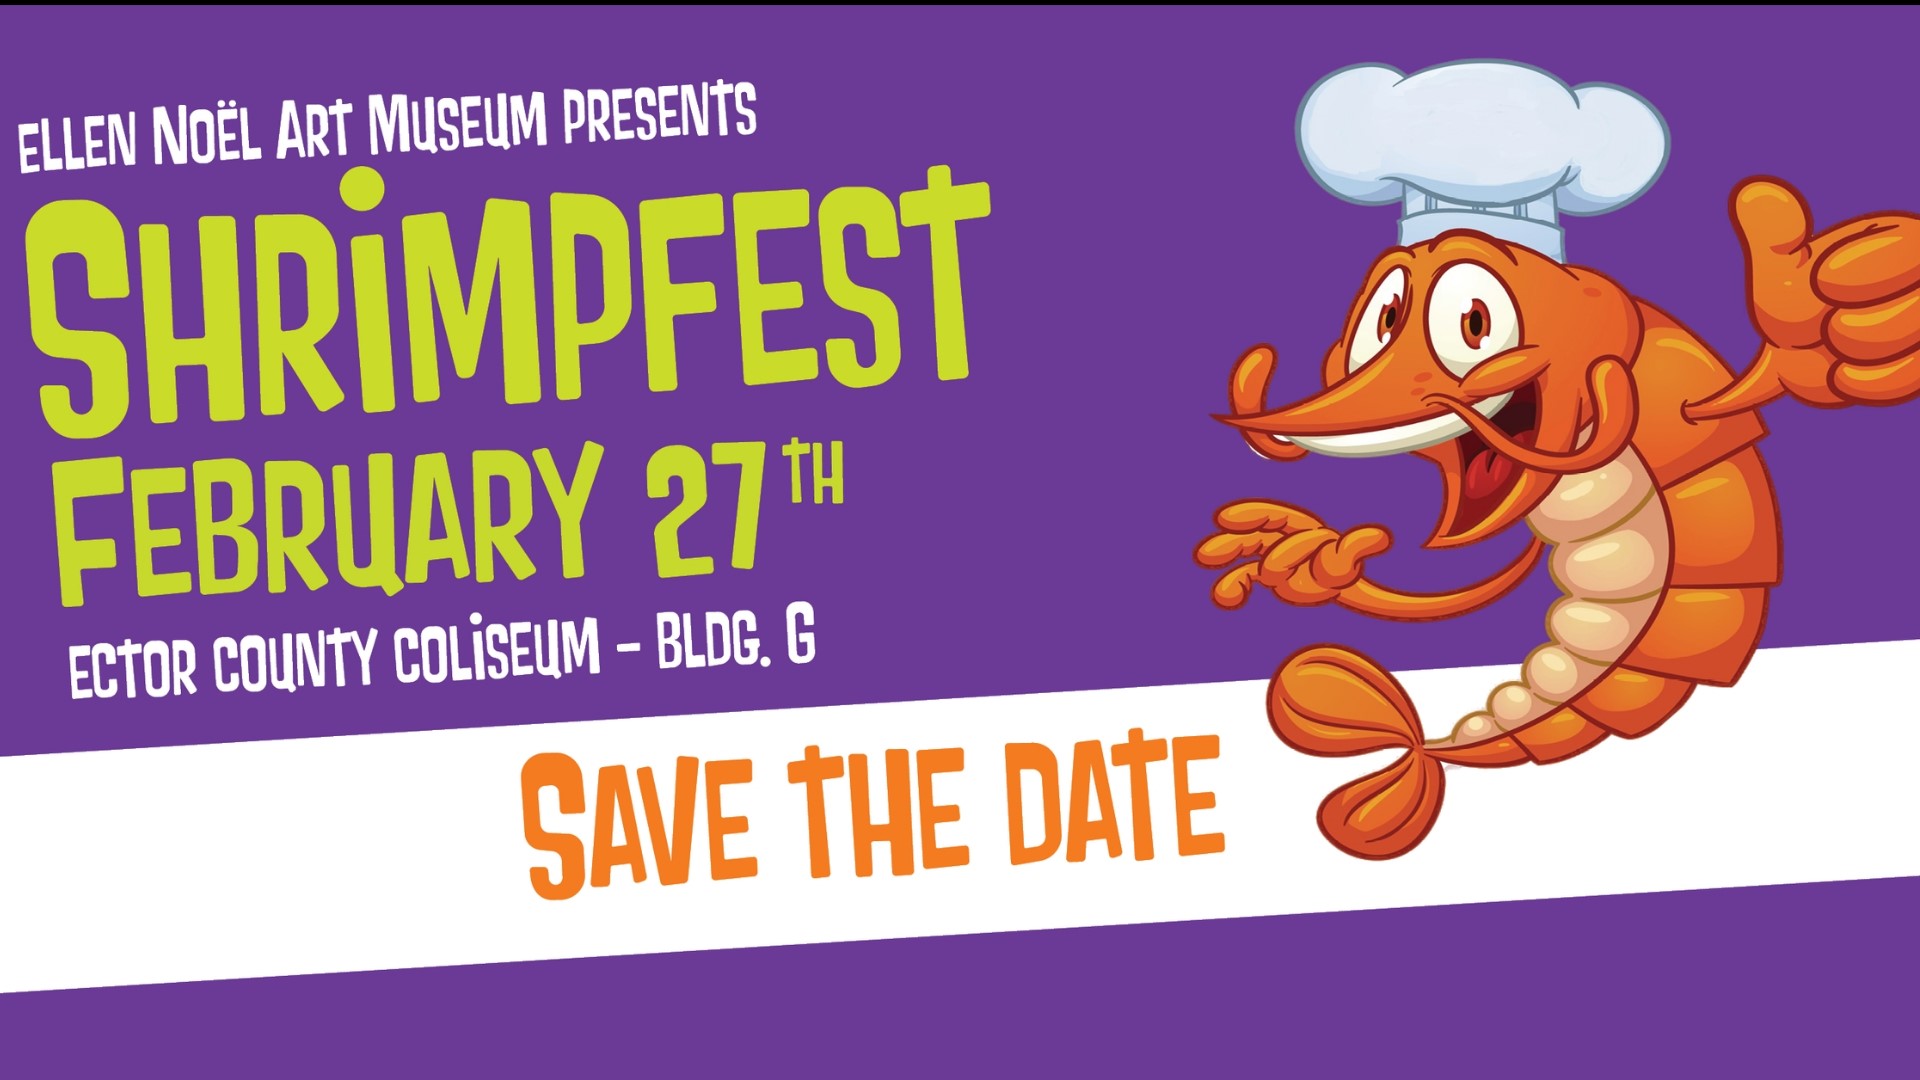 The event features all-you-can-eat shrimp, a silent auction and more.